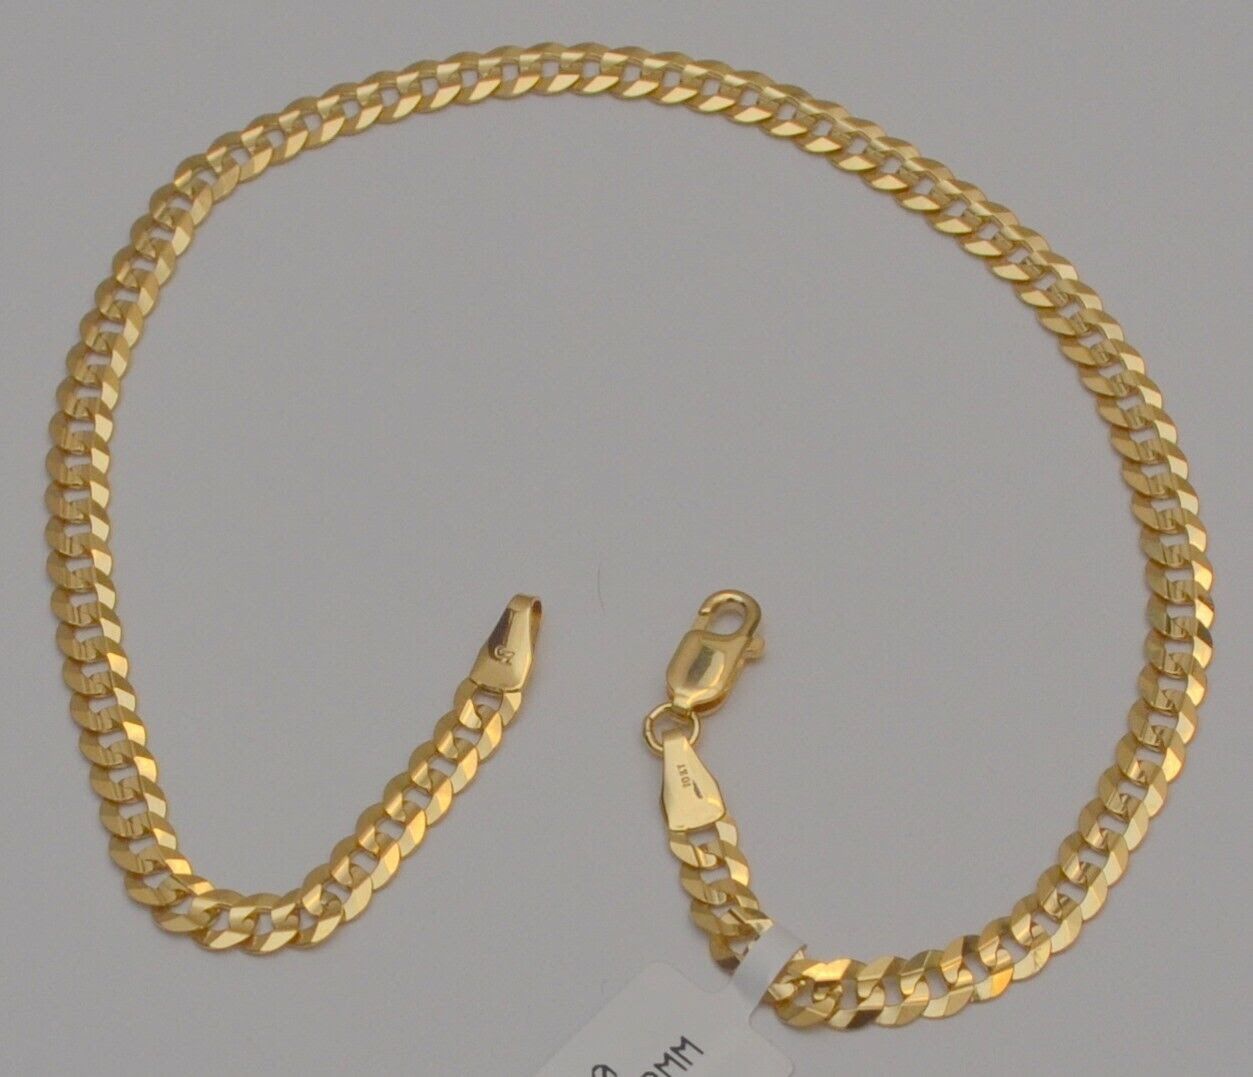 Gold chain 10k solid yellow cuban curb link anklet bracelet 10 in 4.2 mm 4.7 gr